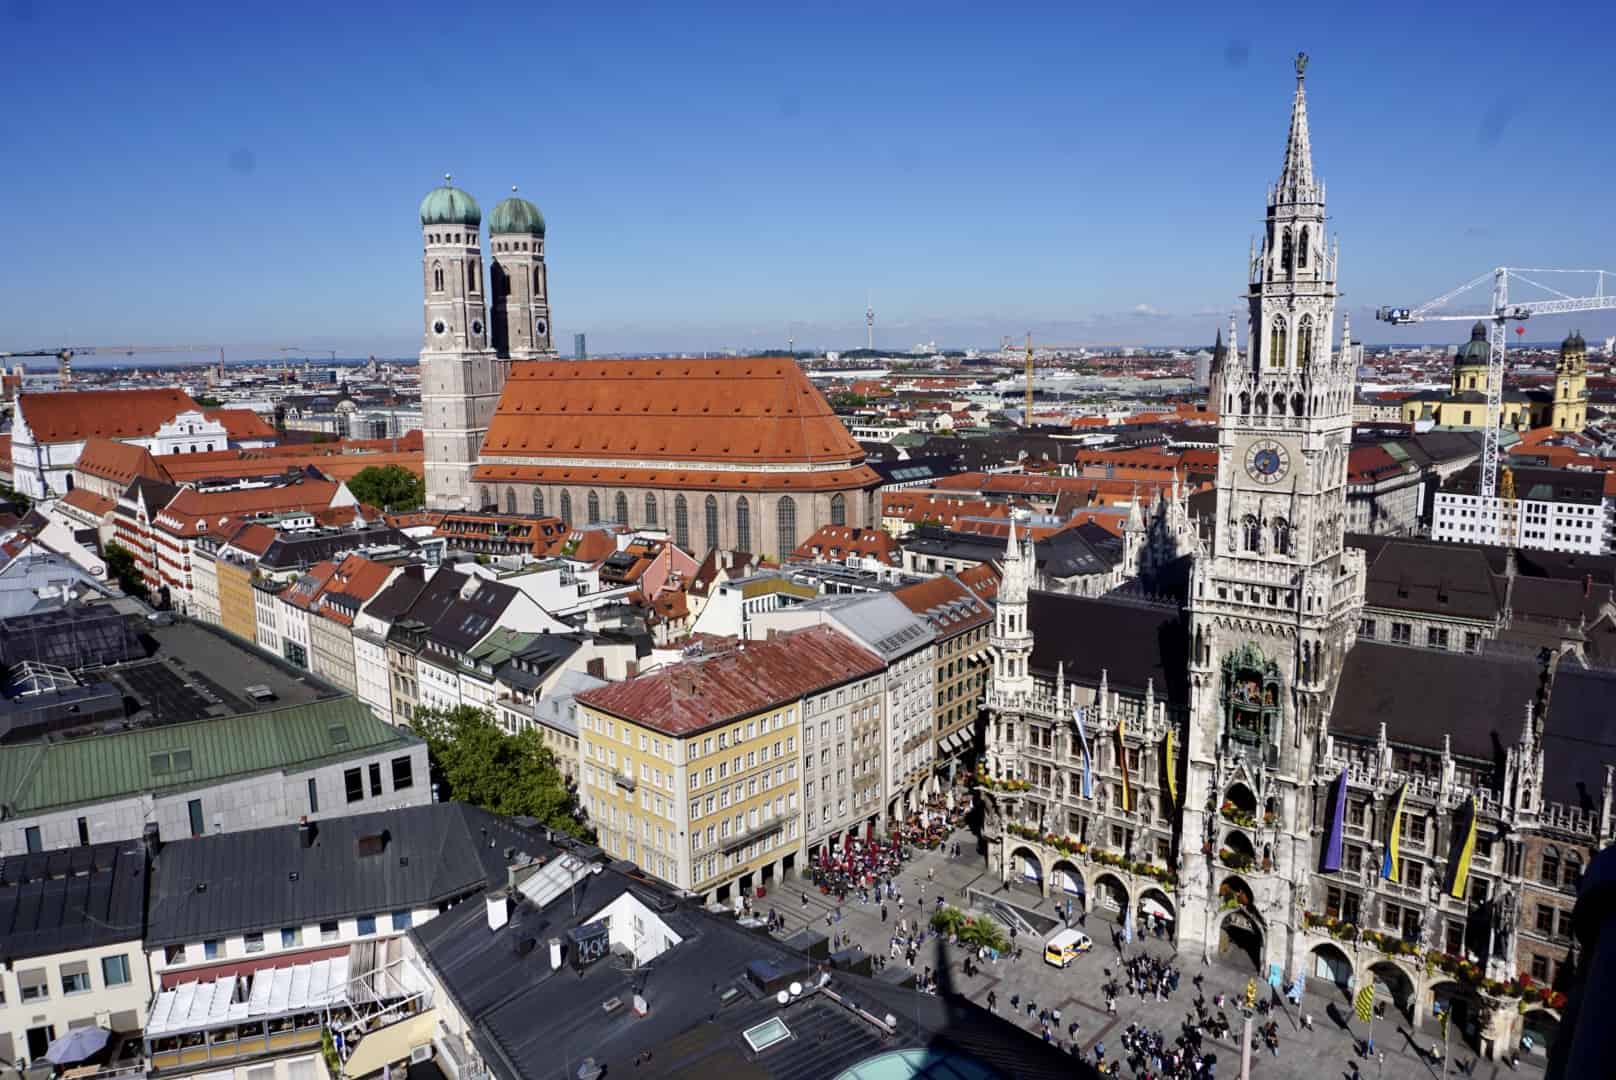 13 Things to Do in Munich, Germany Including Day Trips